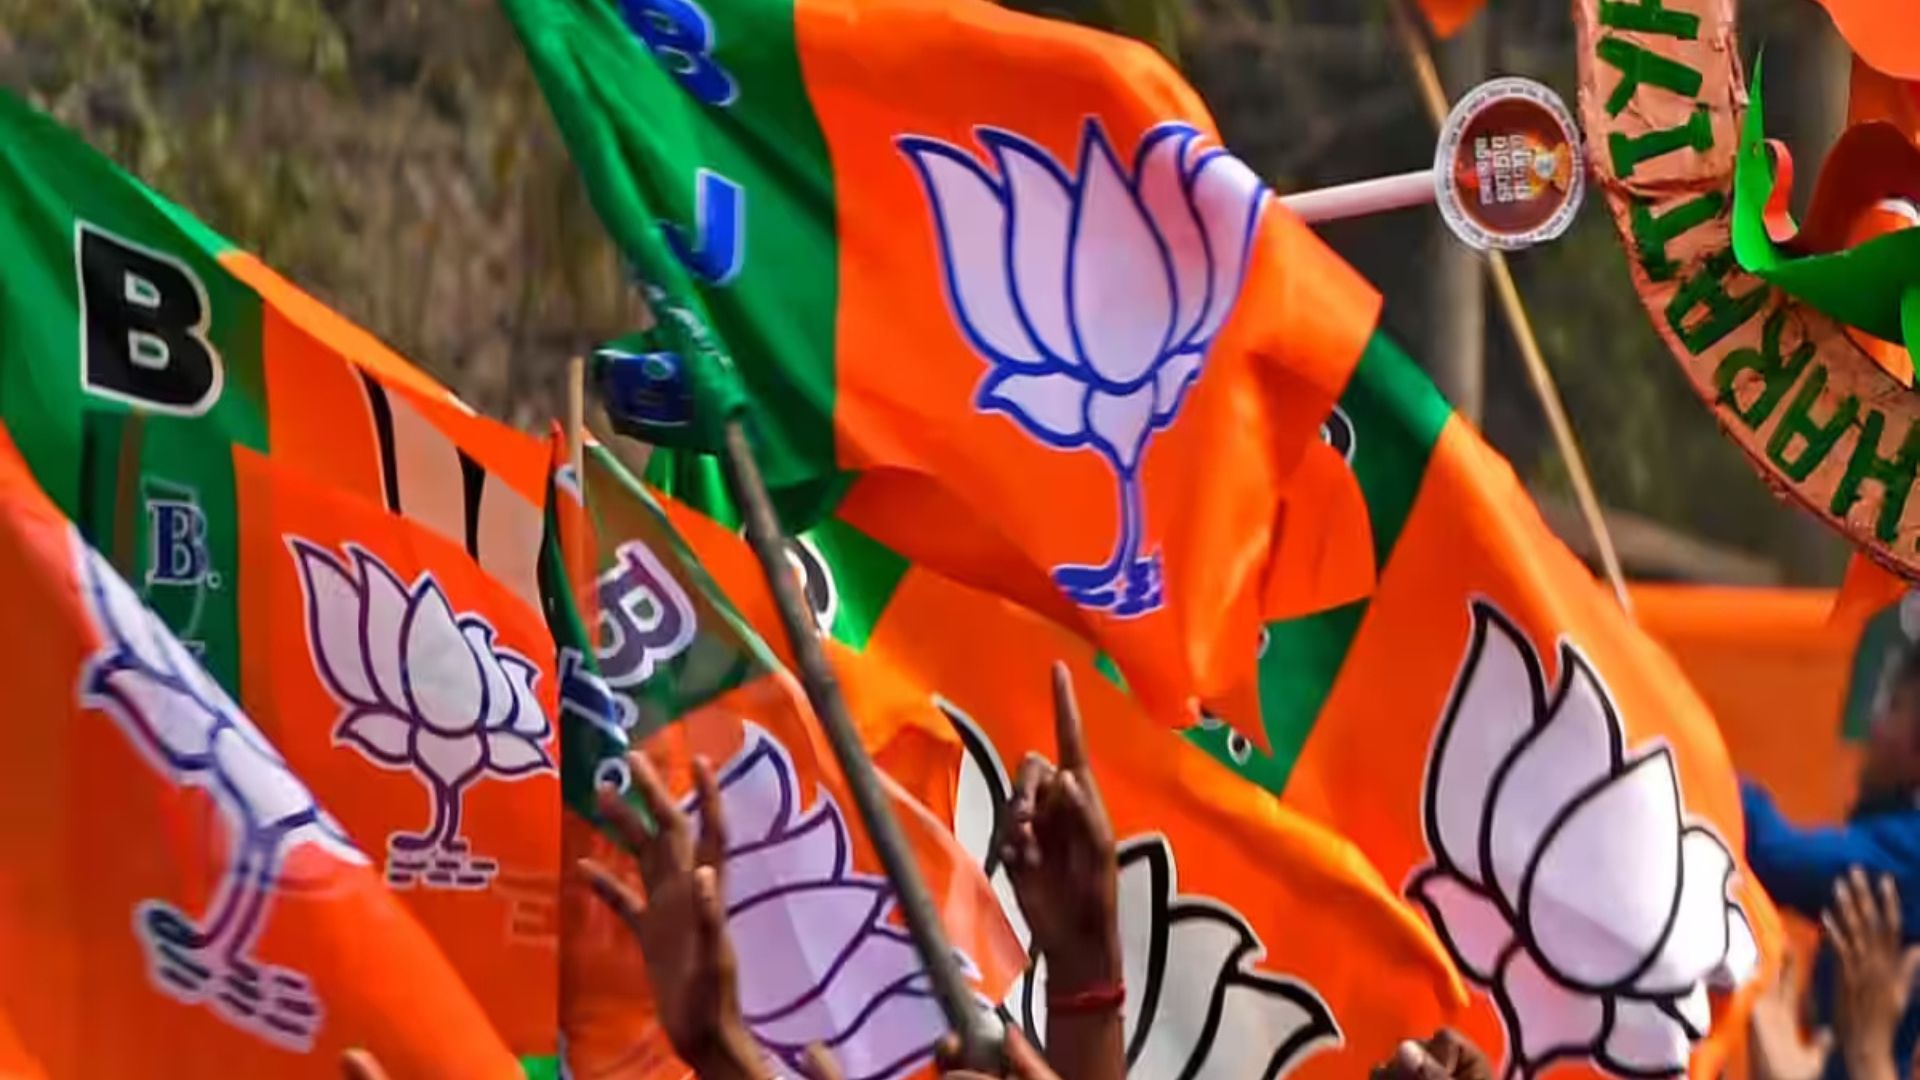 BJP candidates feel the heat as farmers’ groups escalate protests